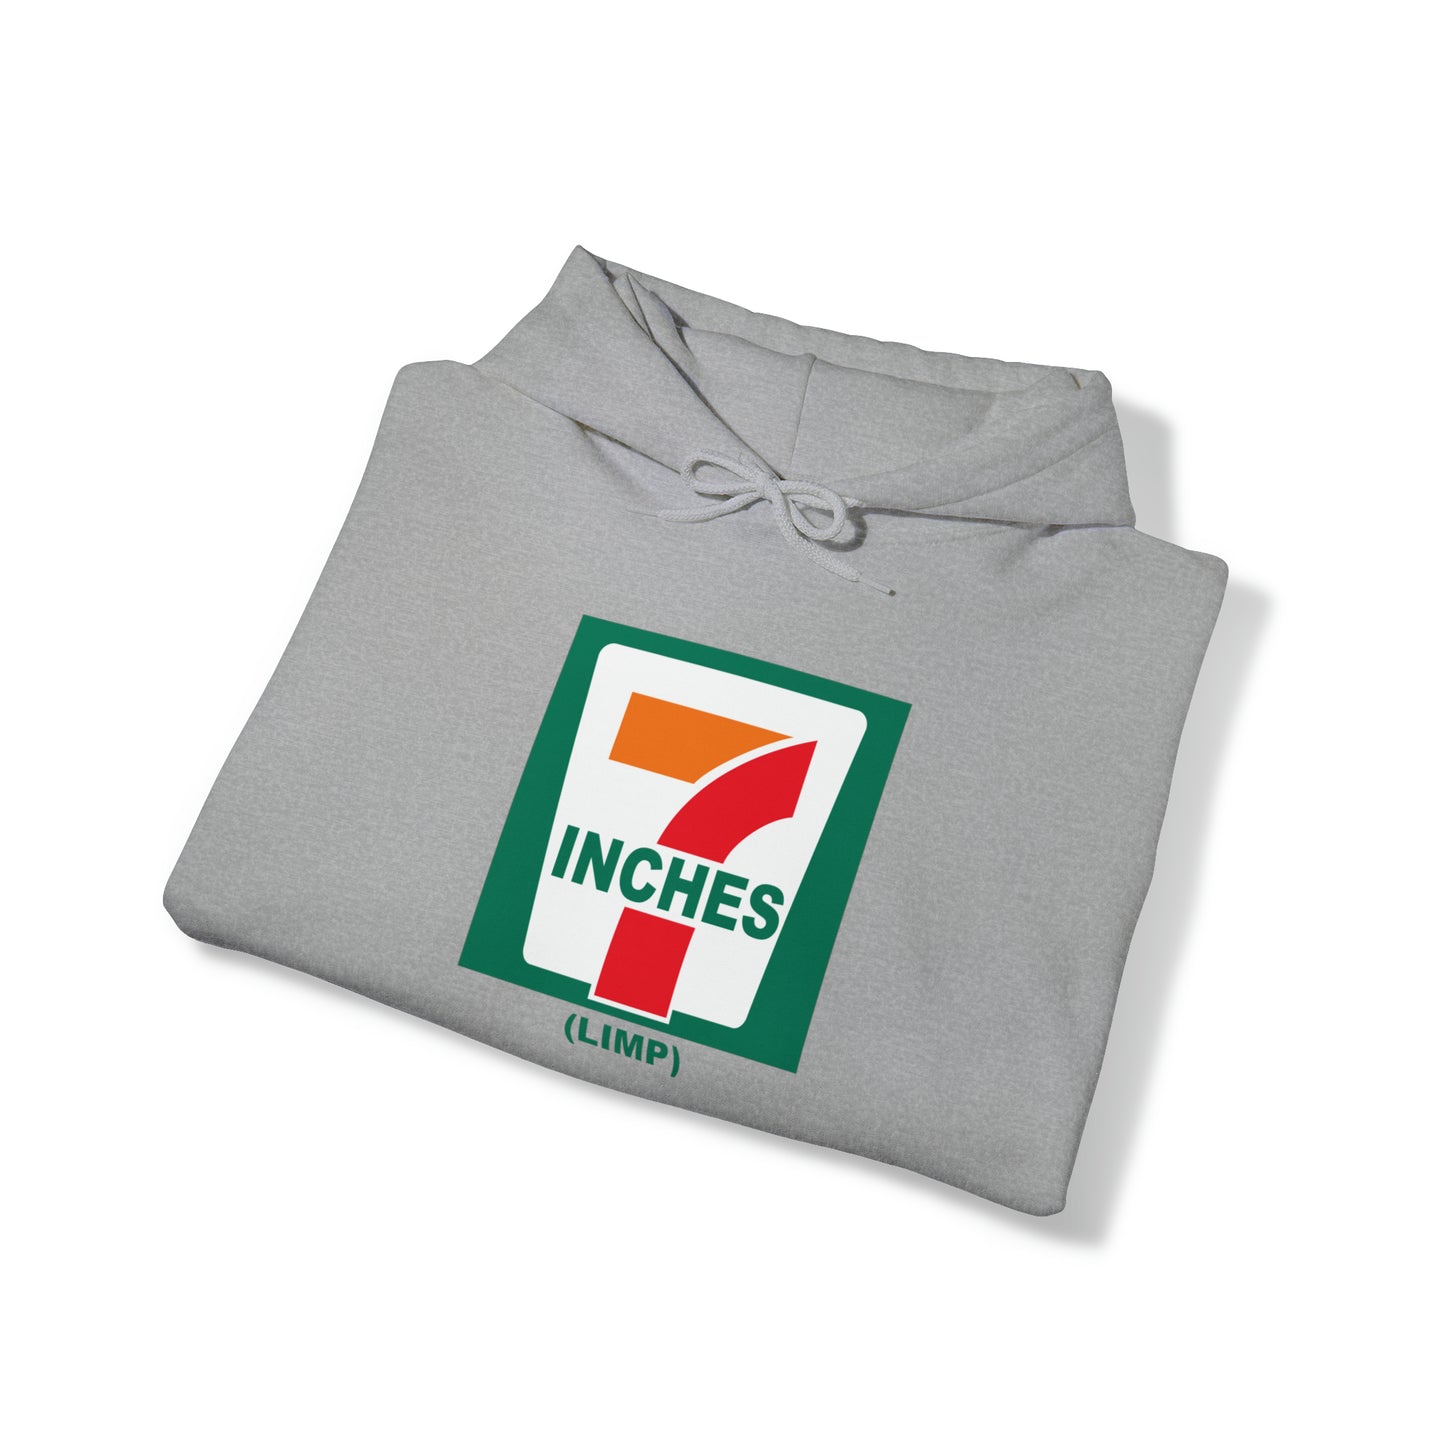 The Seven Inches Hoodie™